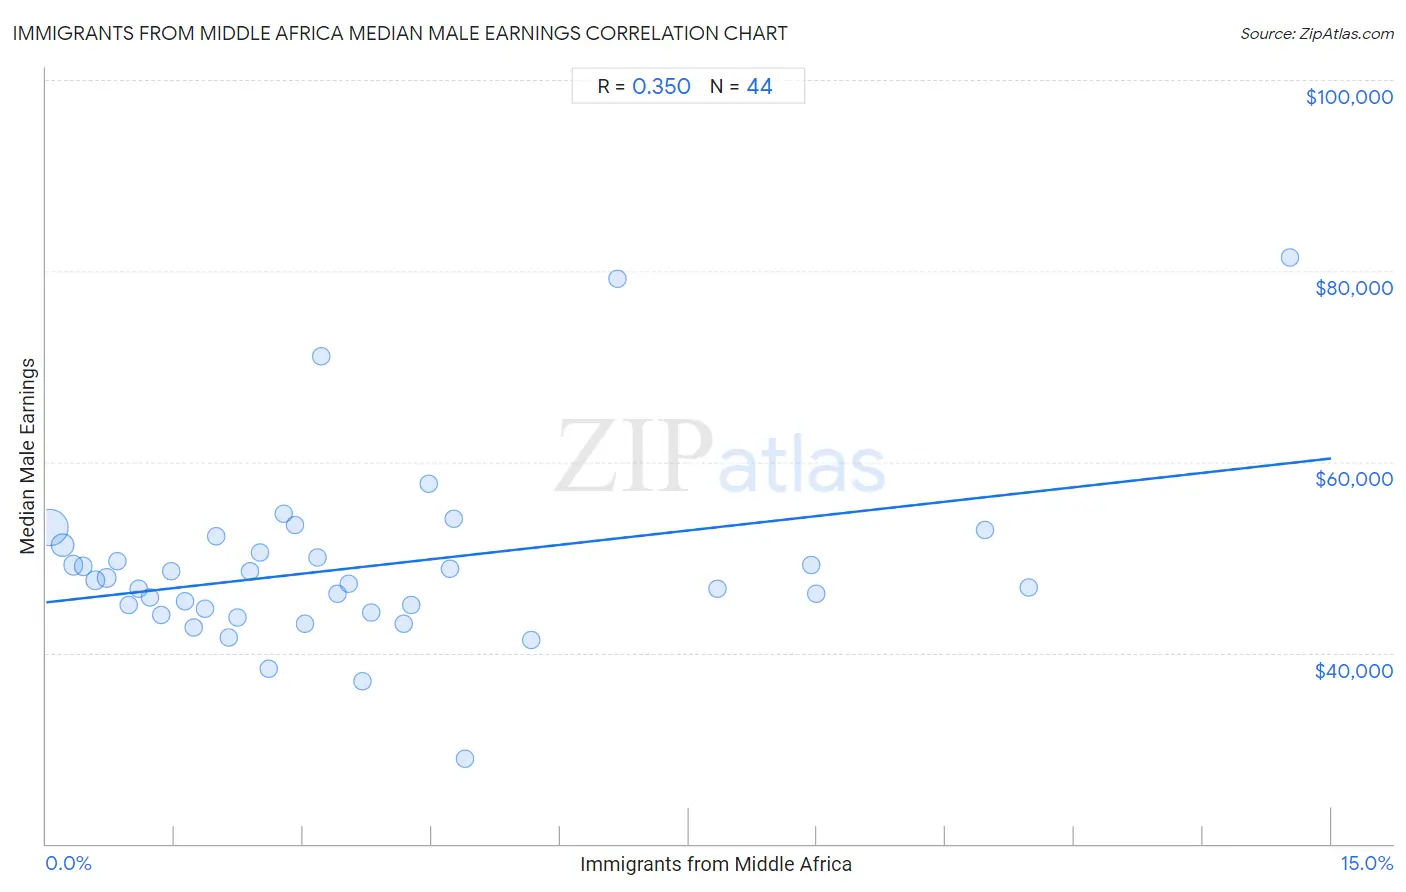 Immigrants from Middle Africa Median Male Earnings